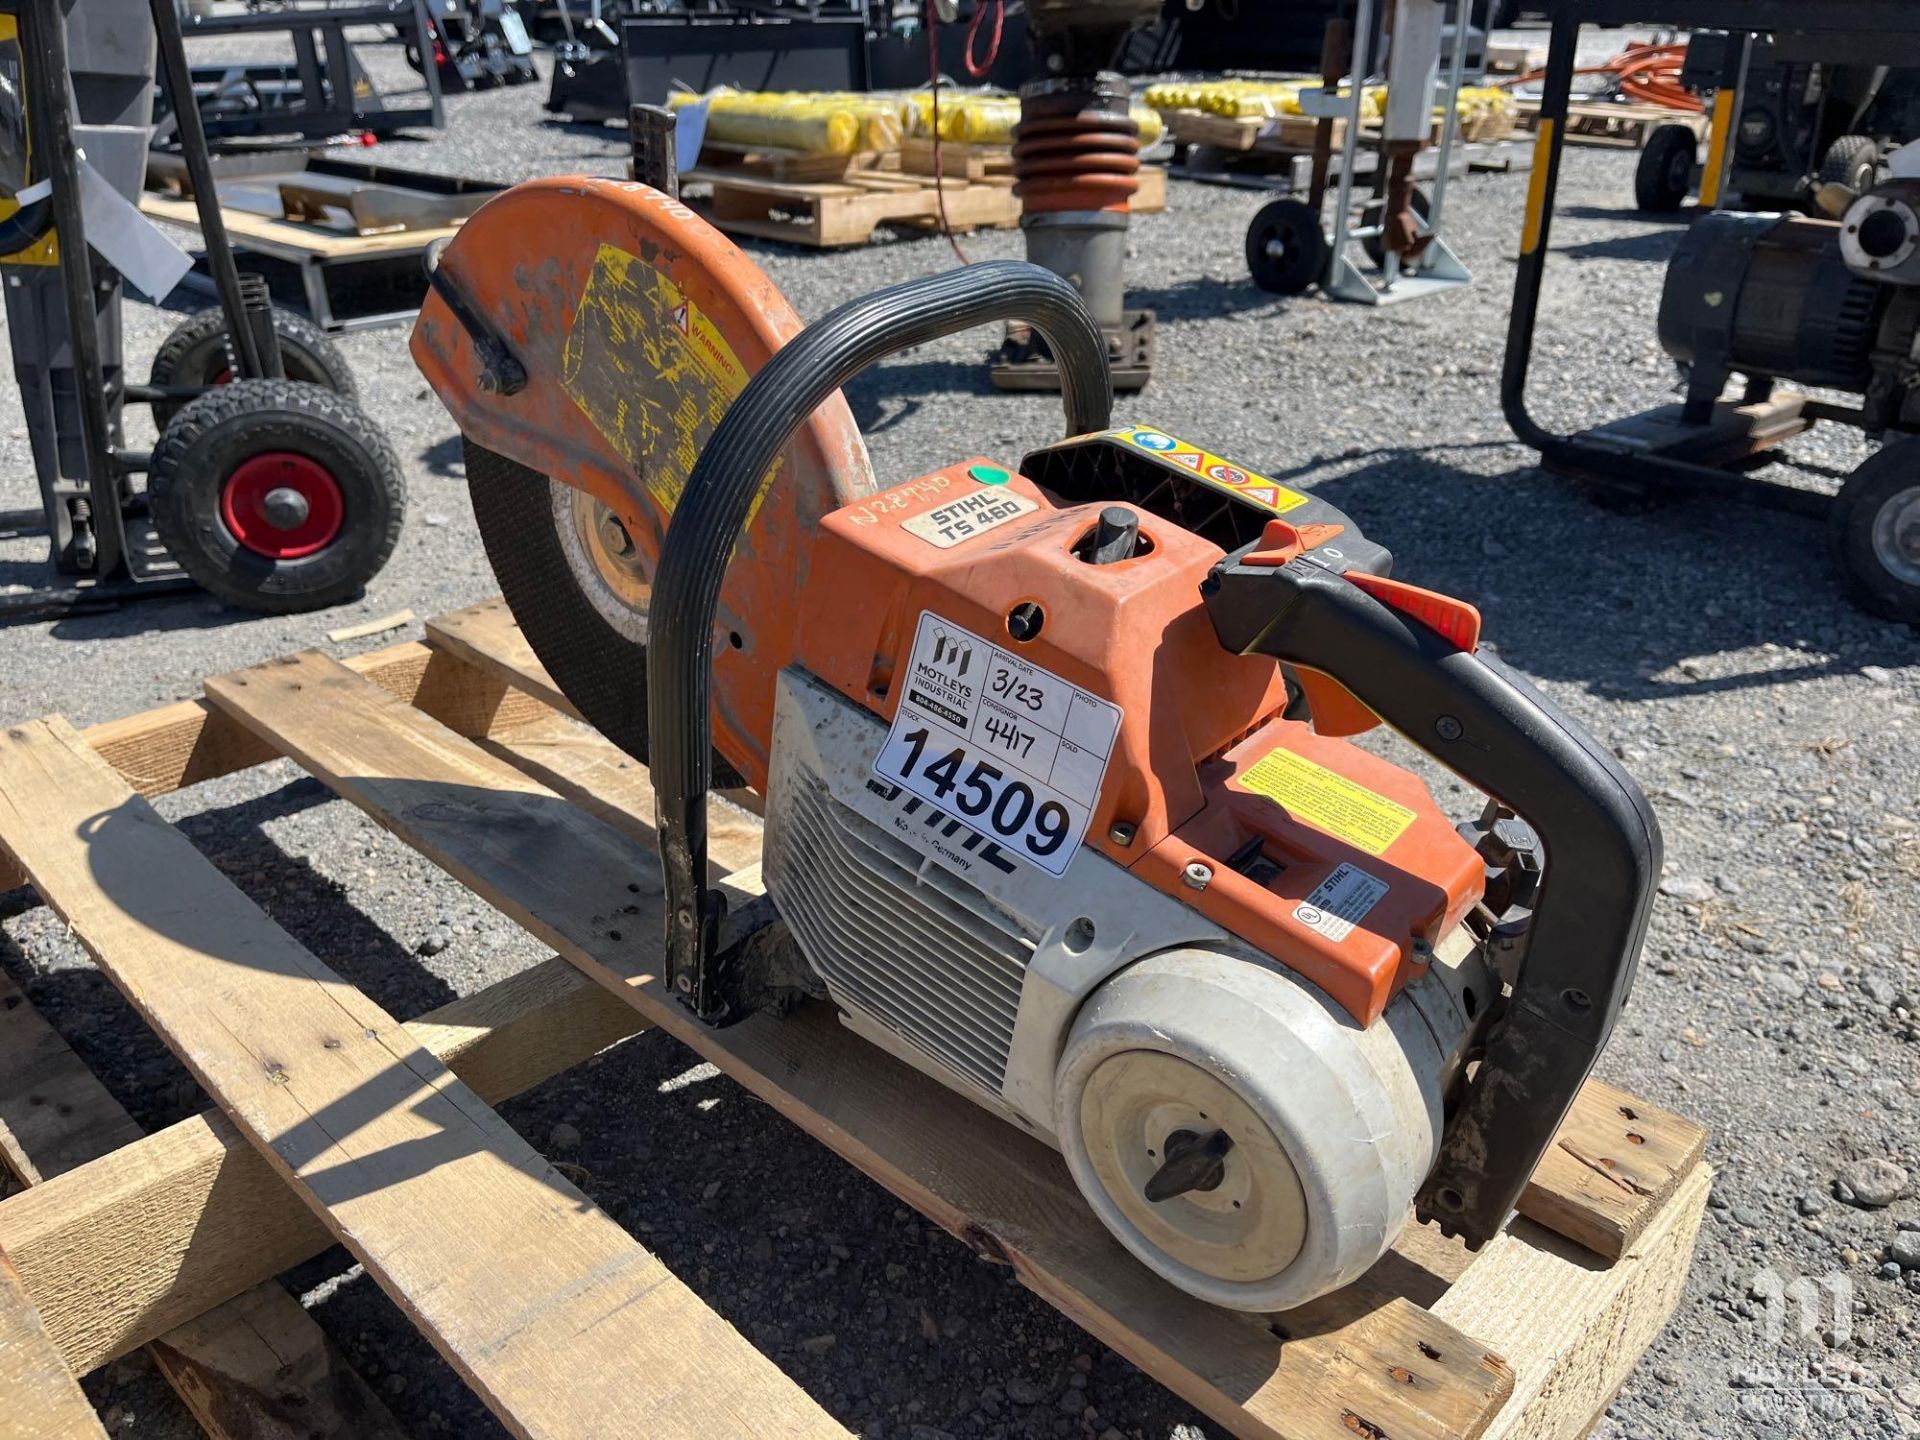 2008 Sthil TS460 Concrete Saw - Image 2 of 6